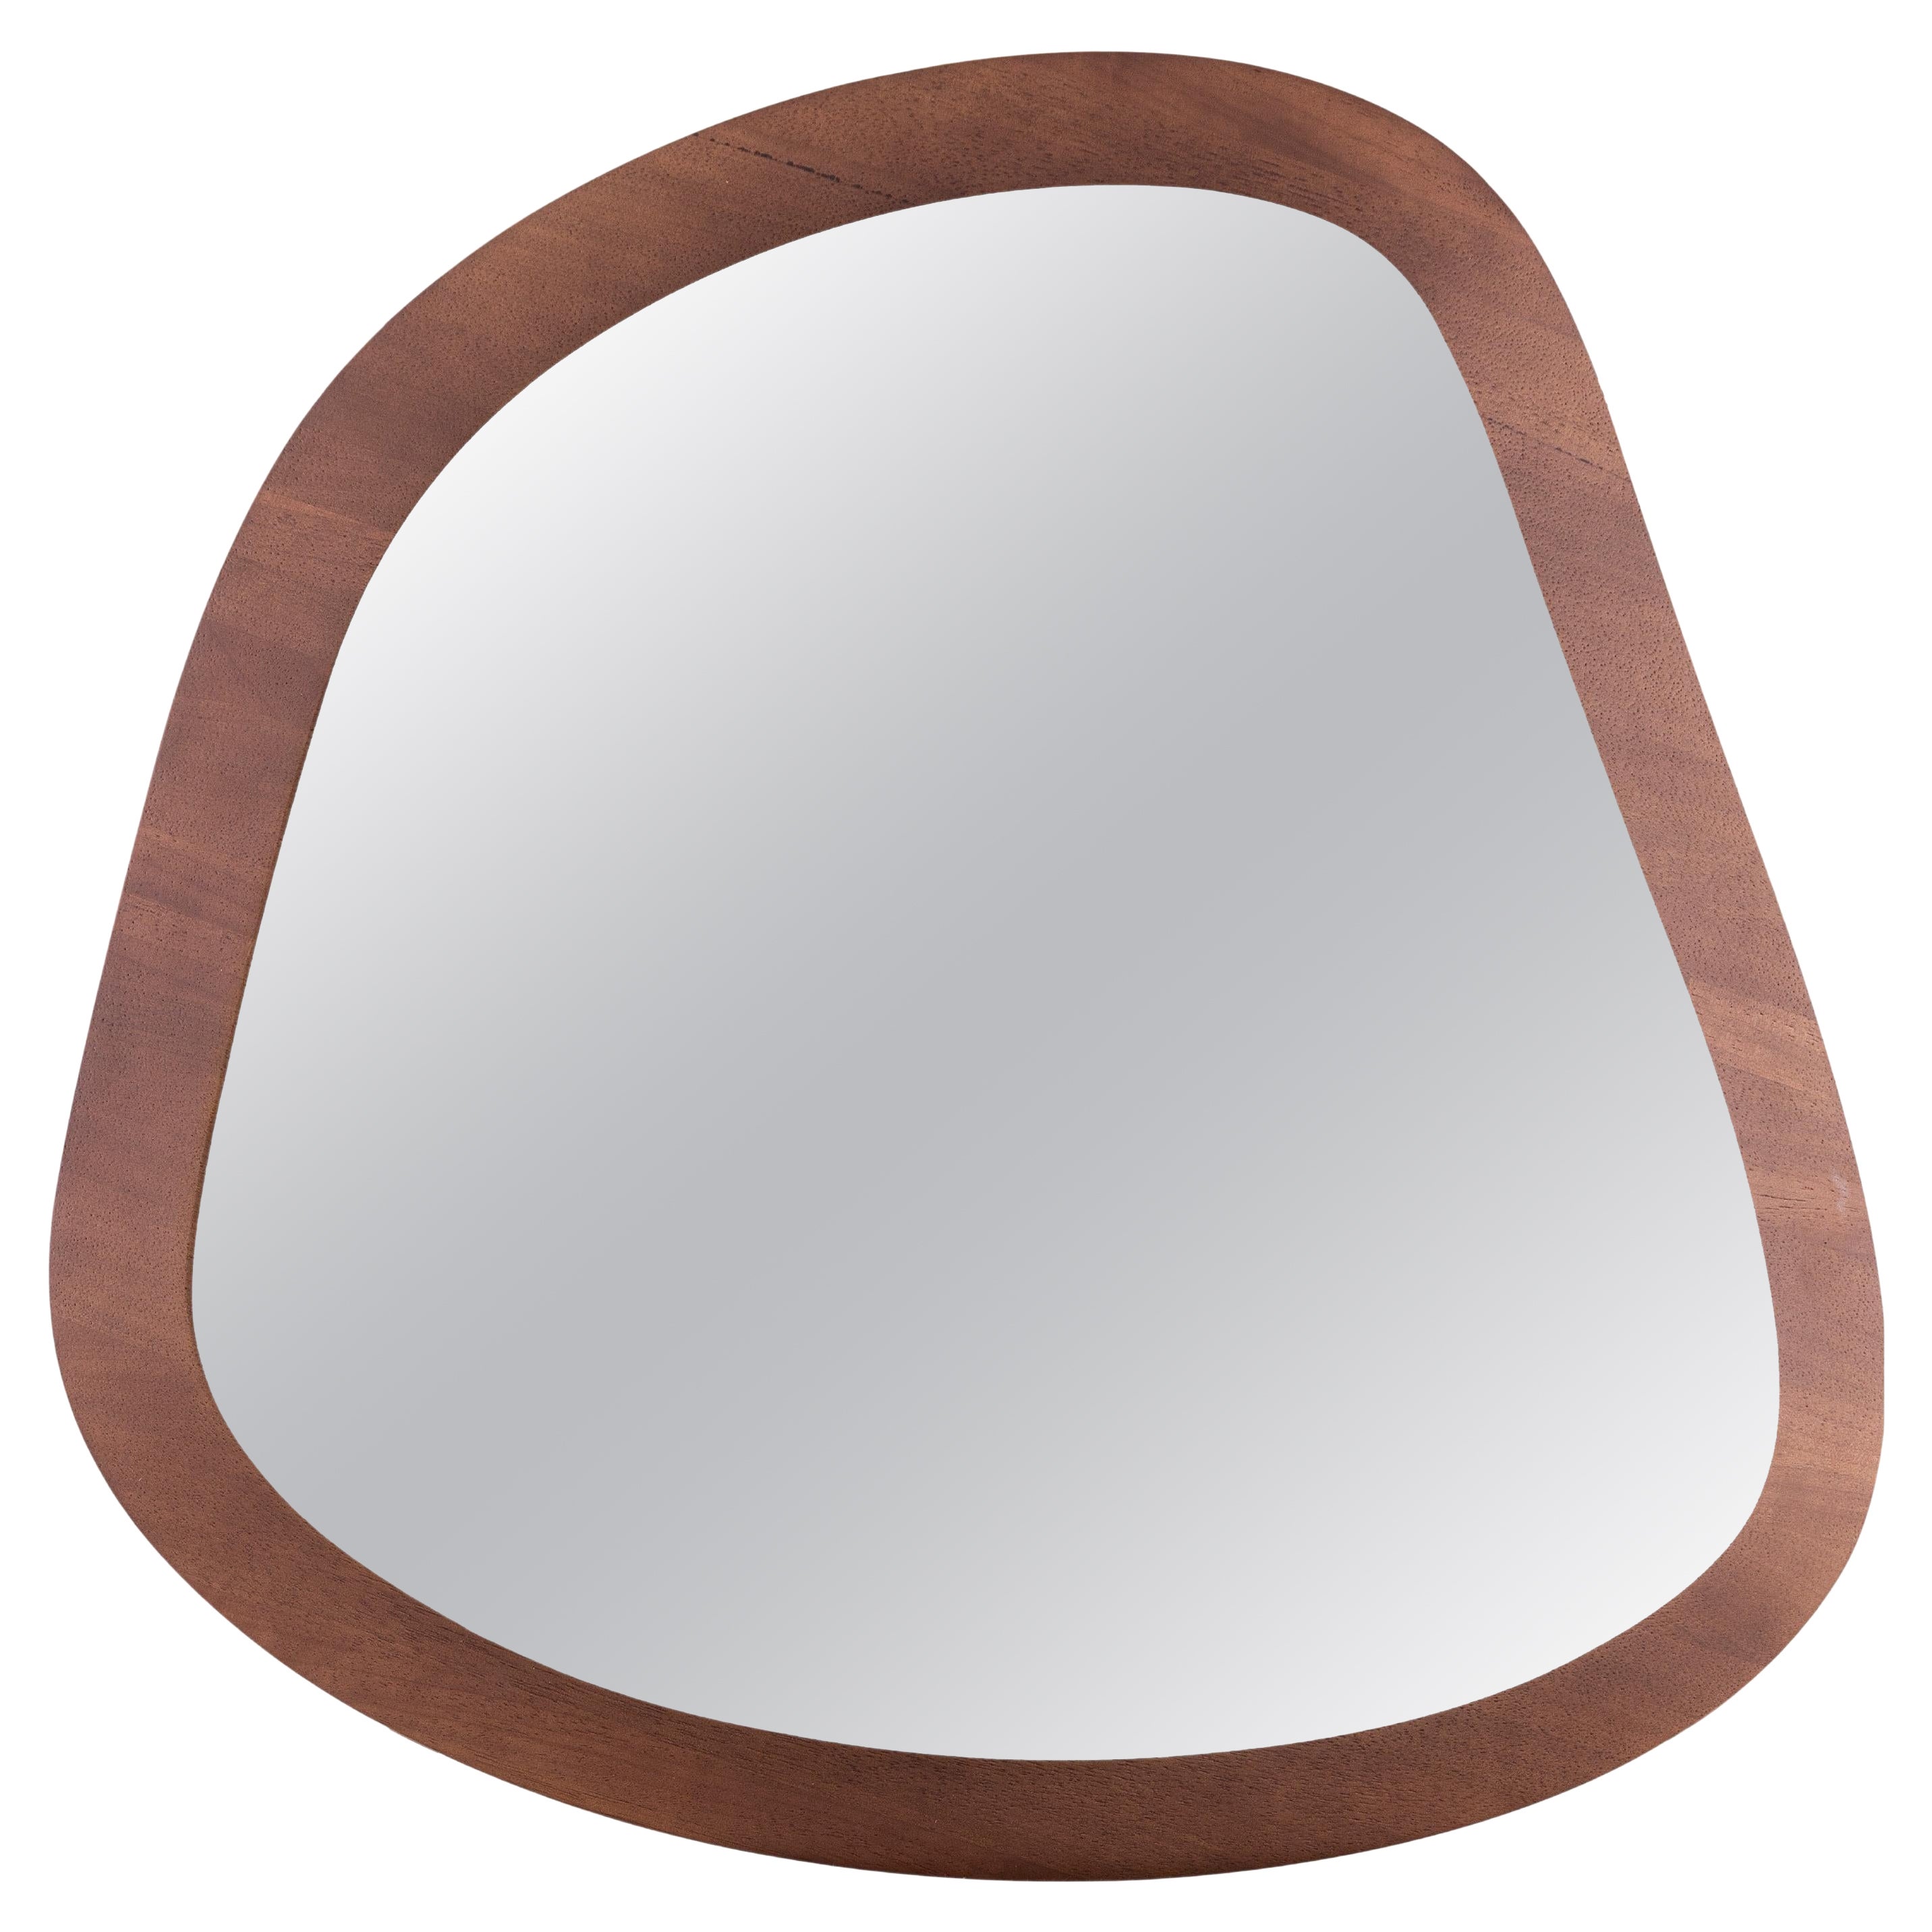 Pante Mirror in Walnut Wood Finish Individual For Sale